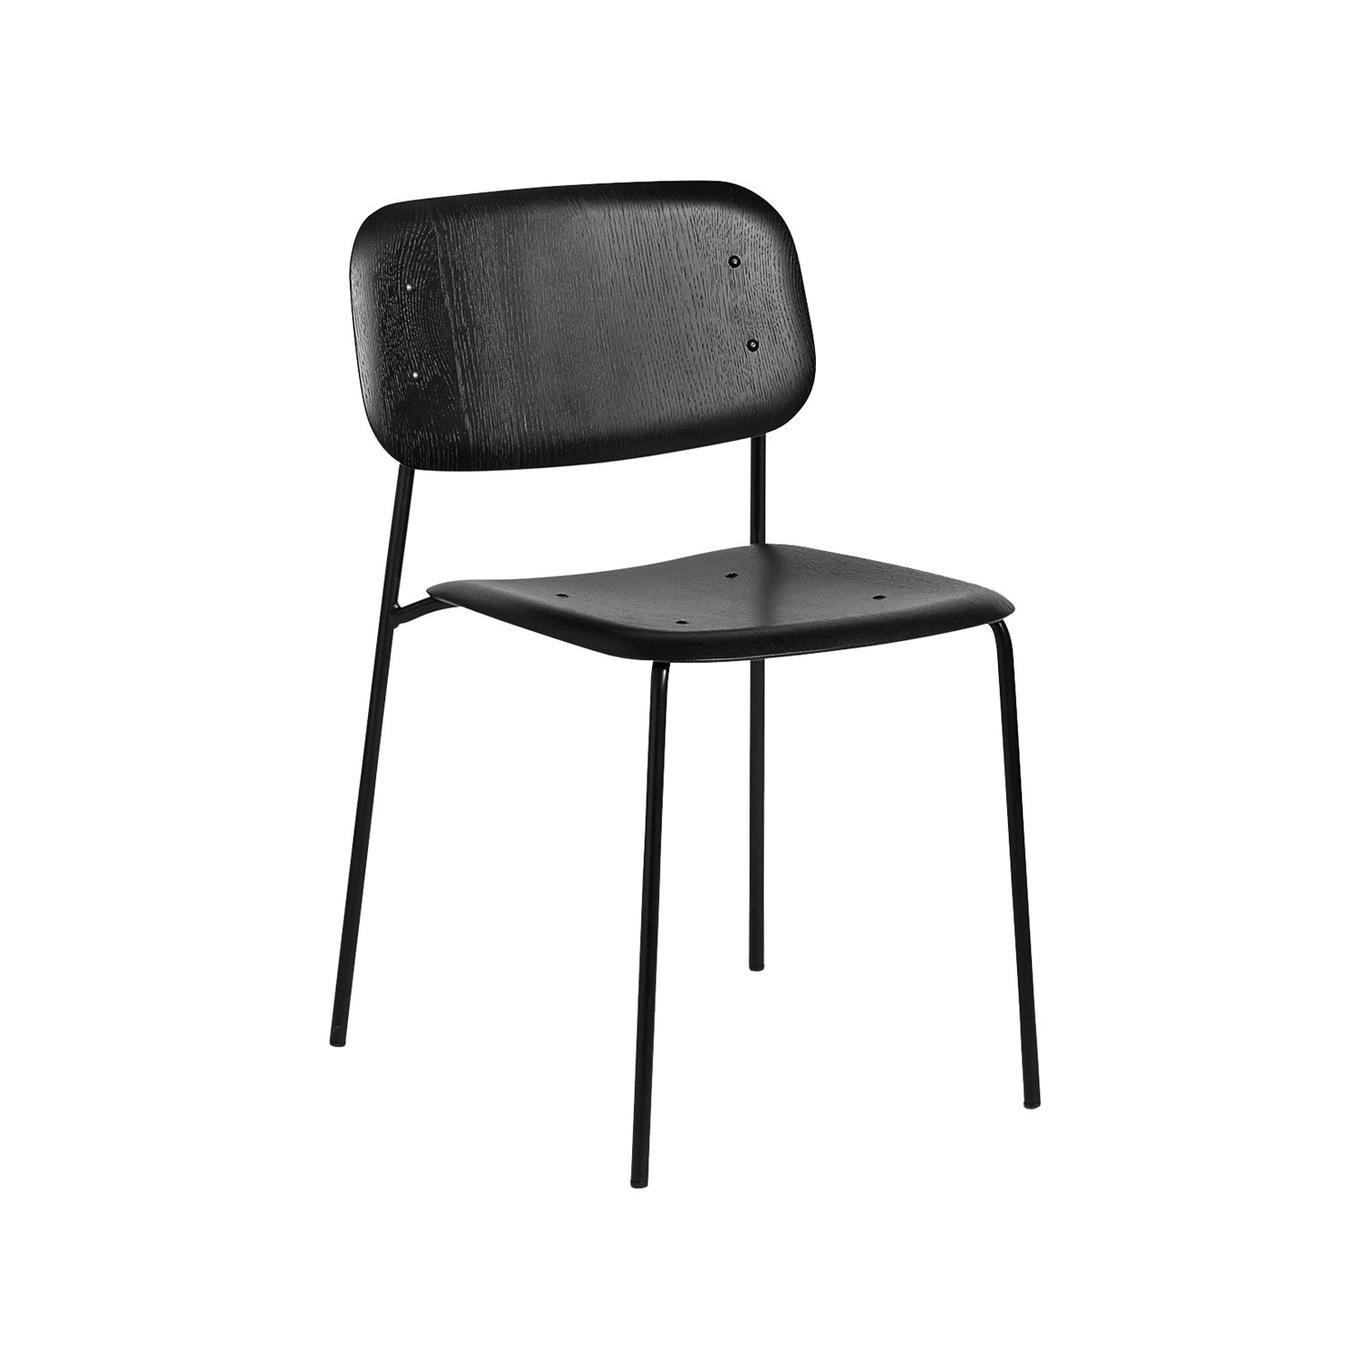 Soft Edge 10 Chair Water-Based Lacquer, Black Seat / Black Legs